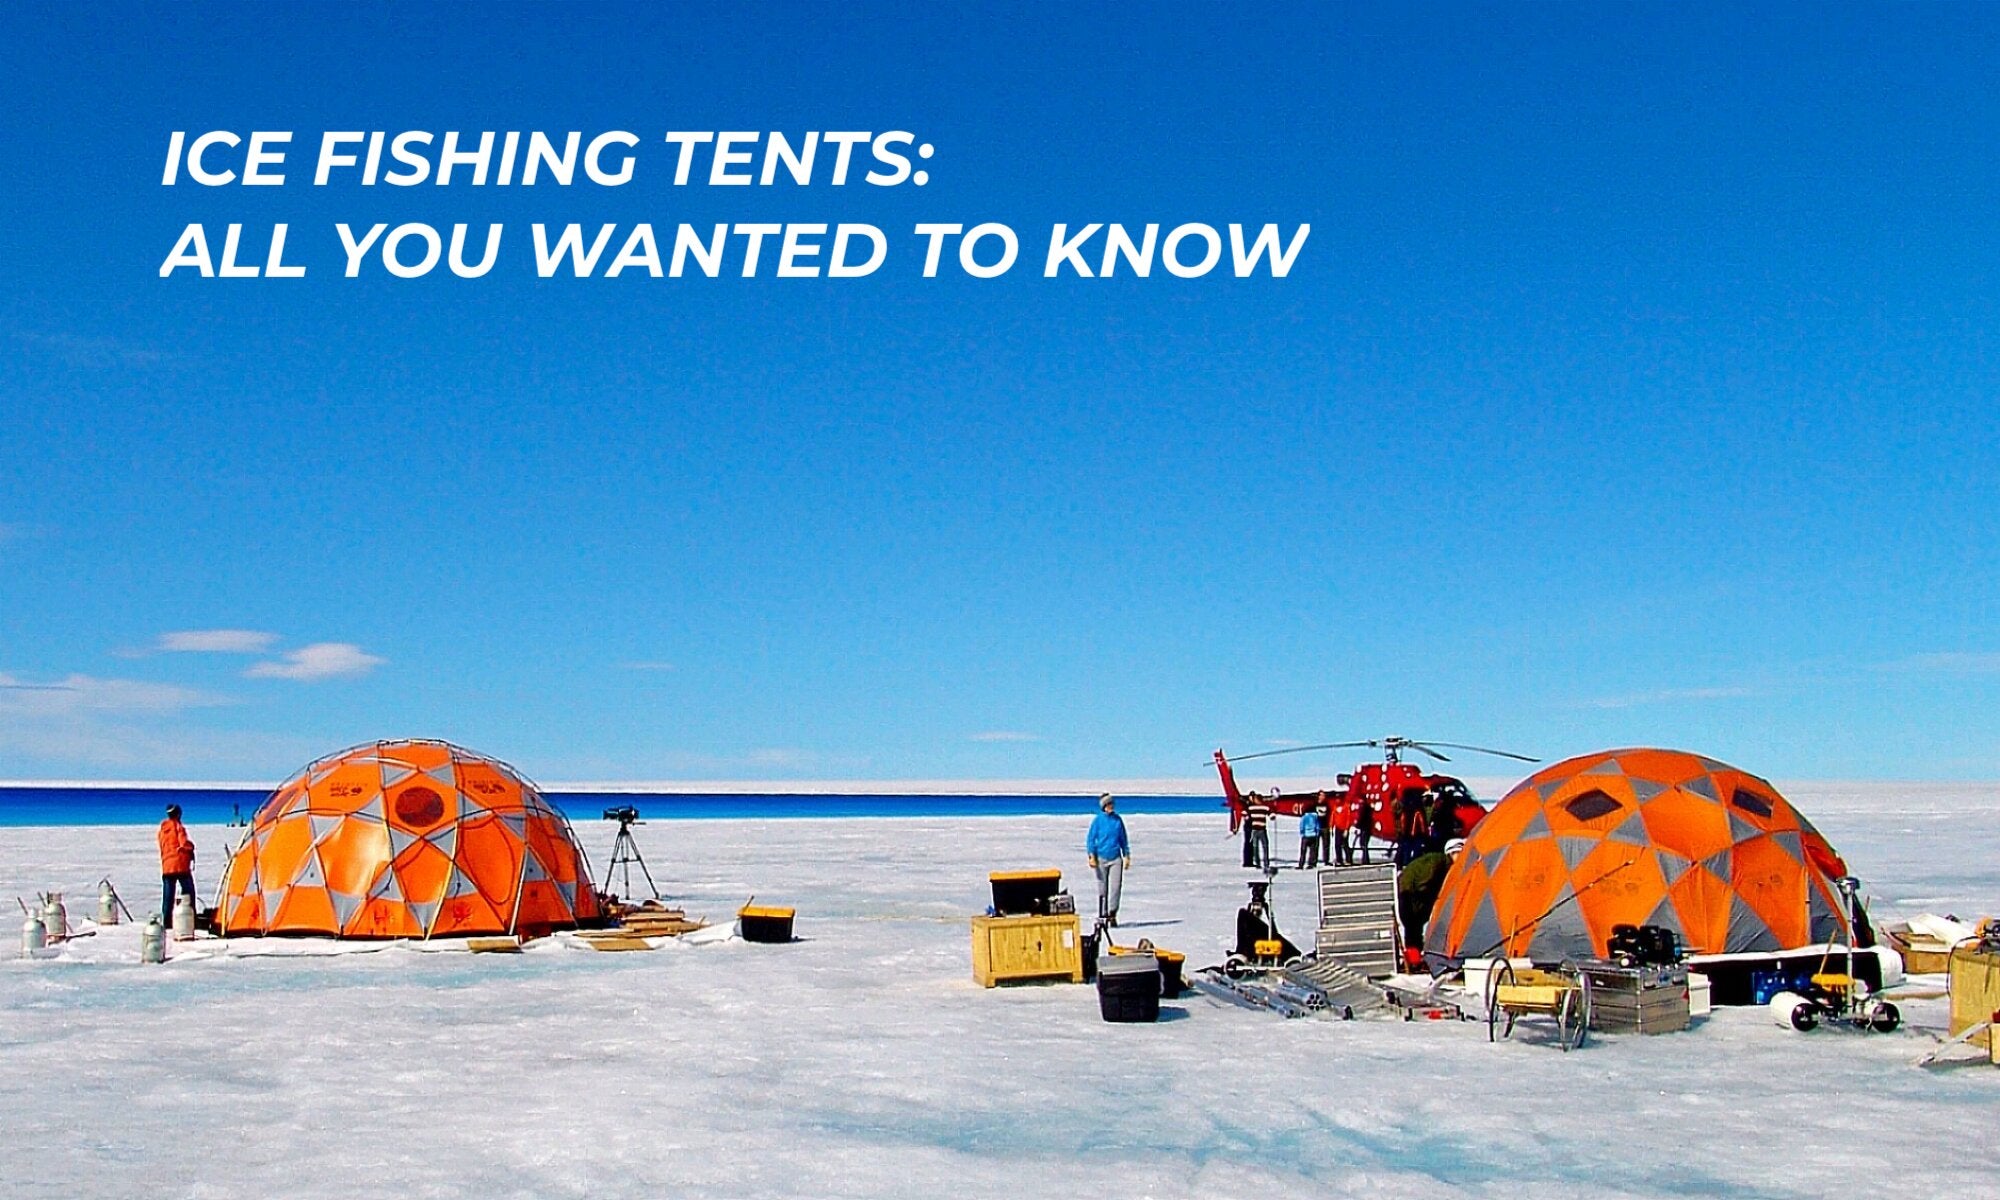 How To Build An Ice Fishing Shack To Provide Shelter During Ice Fishing